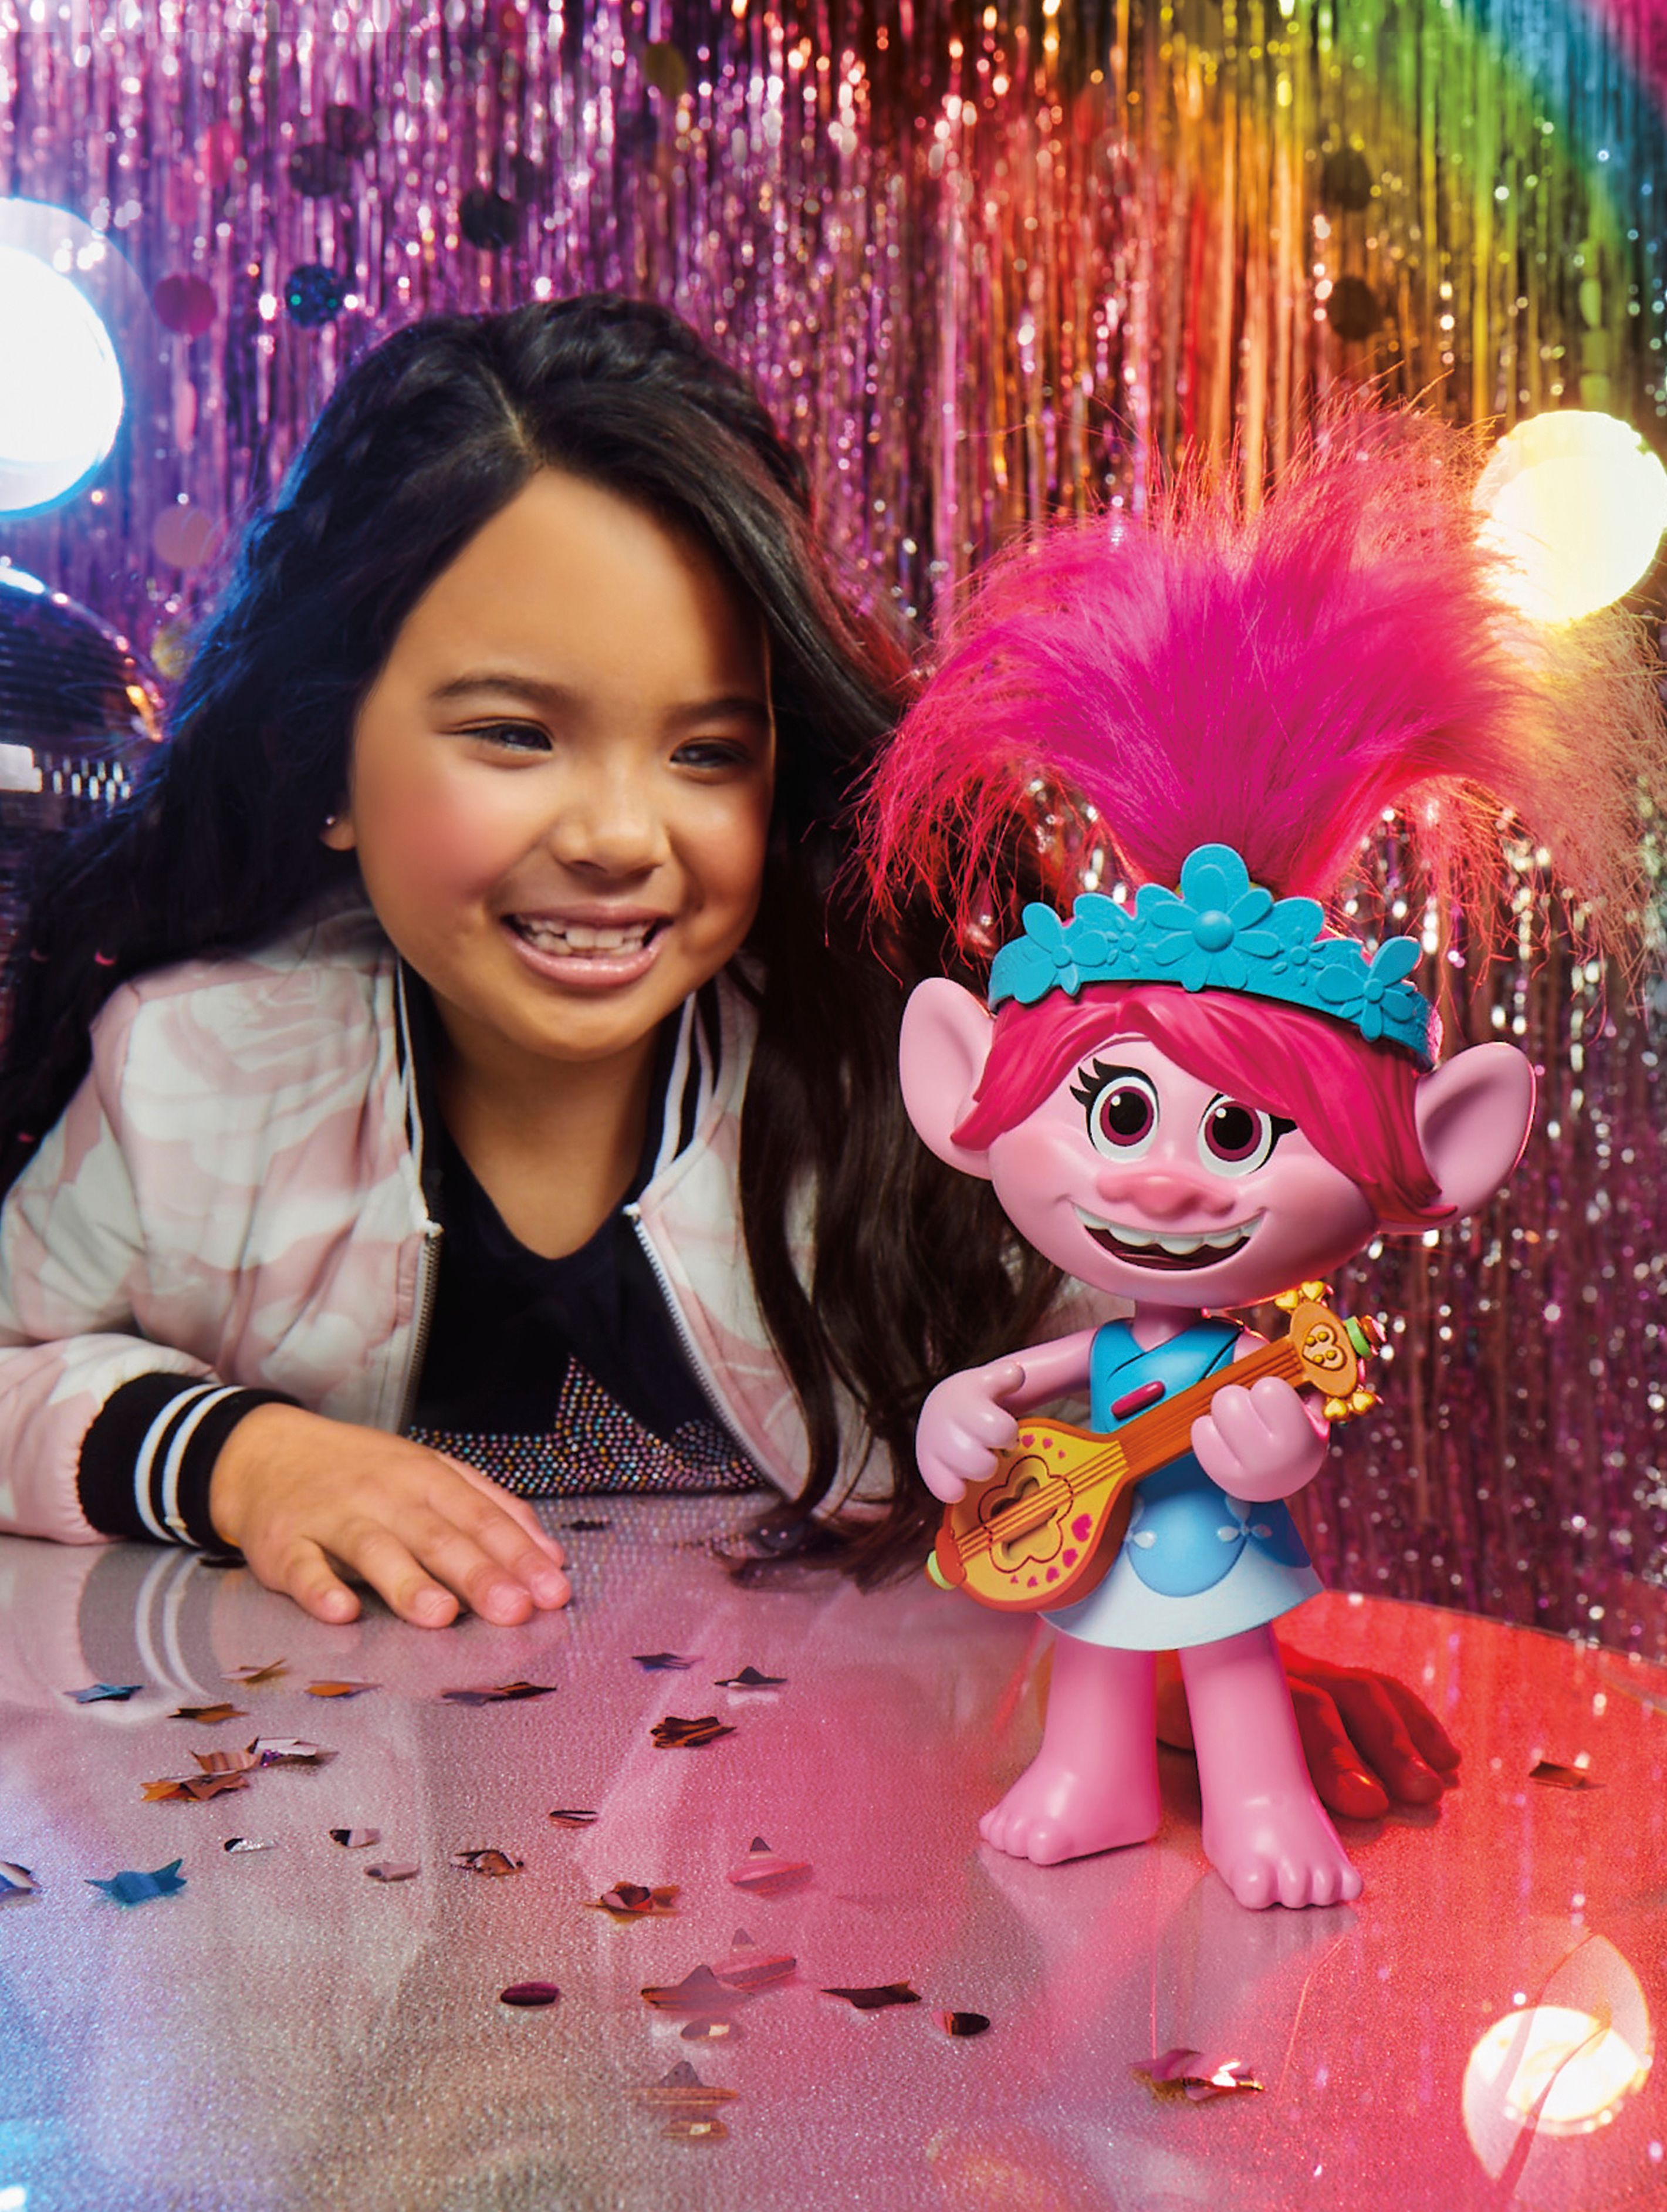 DreamWorks Trolls Popstar Poppy Singing Doll, Includes Toy Ukulele, Plays Movie Song - image 3 of 3